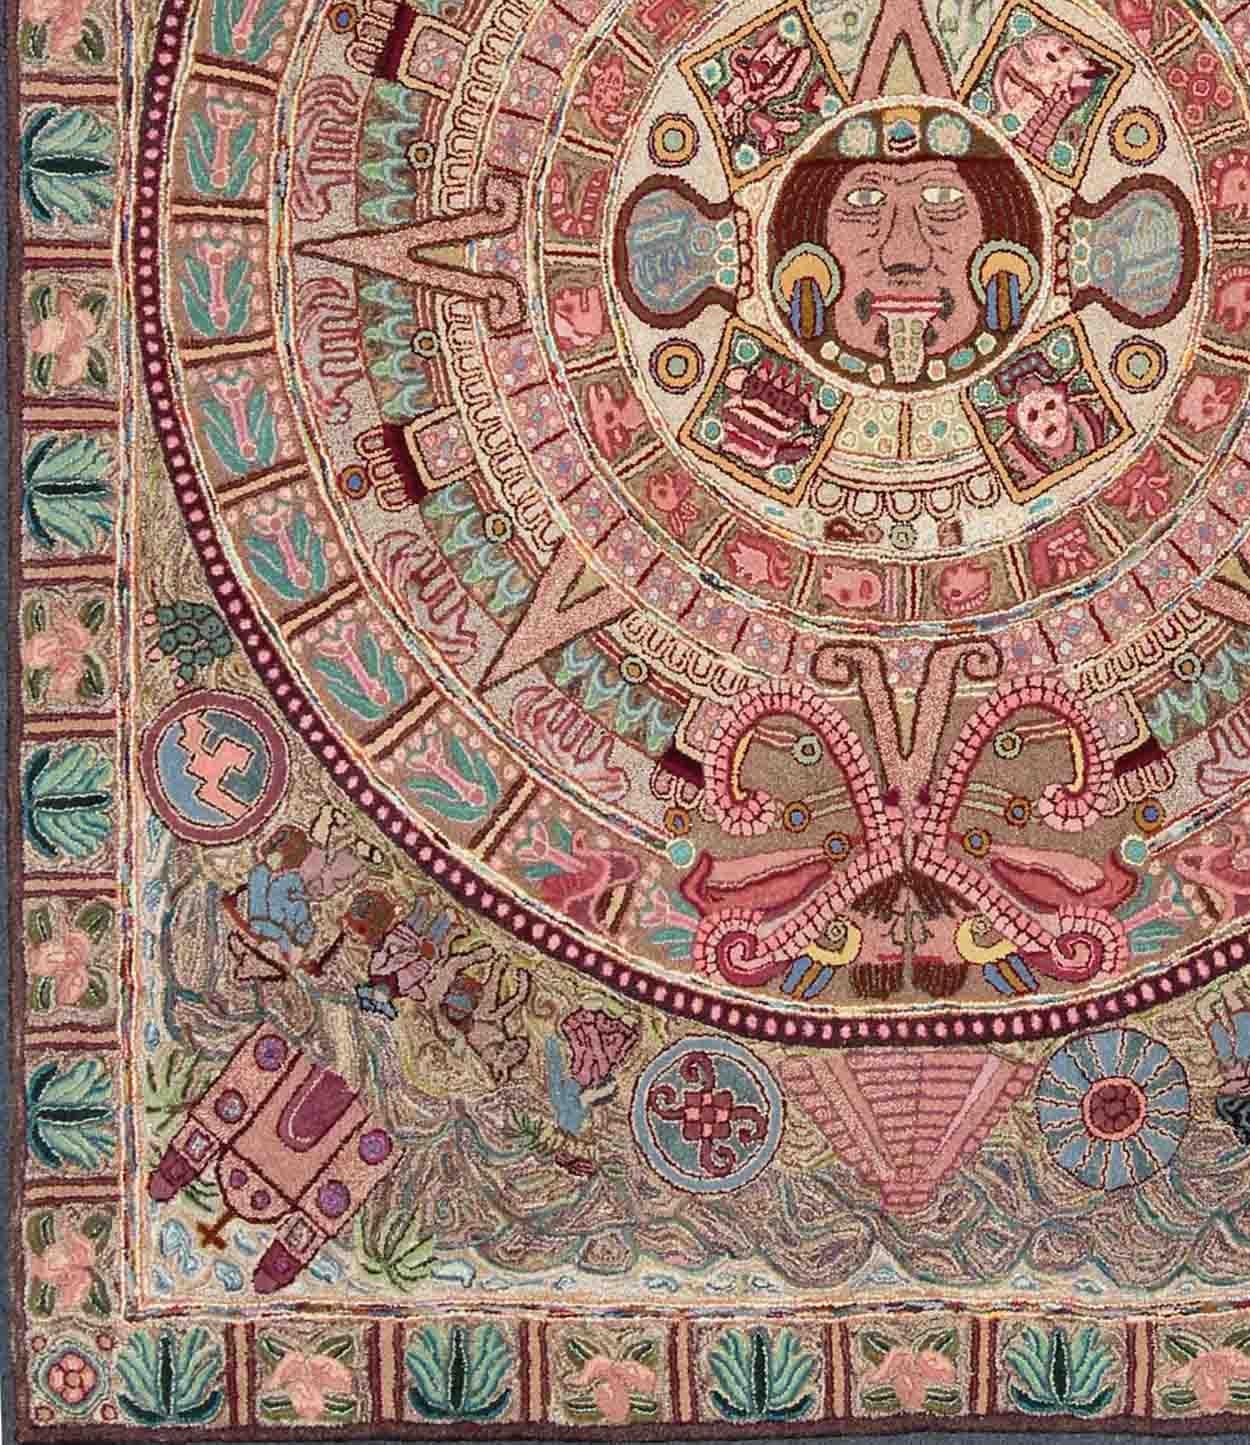 This very unusual American hook rug features an Aztec calendar design in the center and figures from Chichen Itza, Mayan Ruins, and life in the countryside in Central and South America. 
Measures: 8'1 x 10'4.